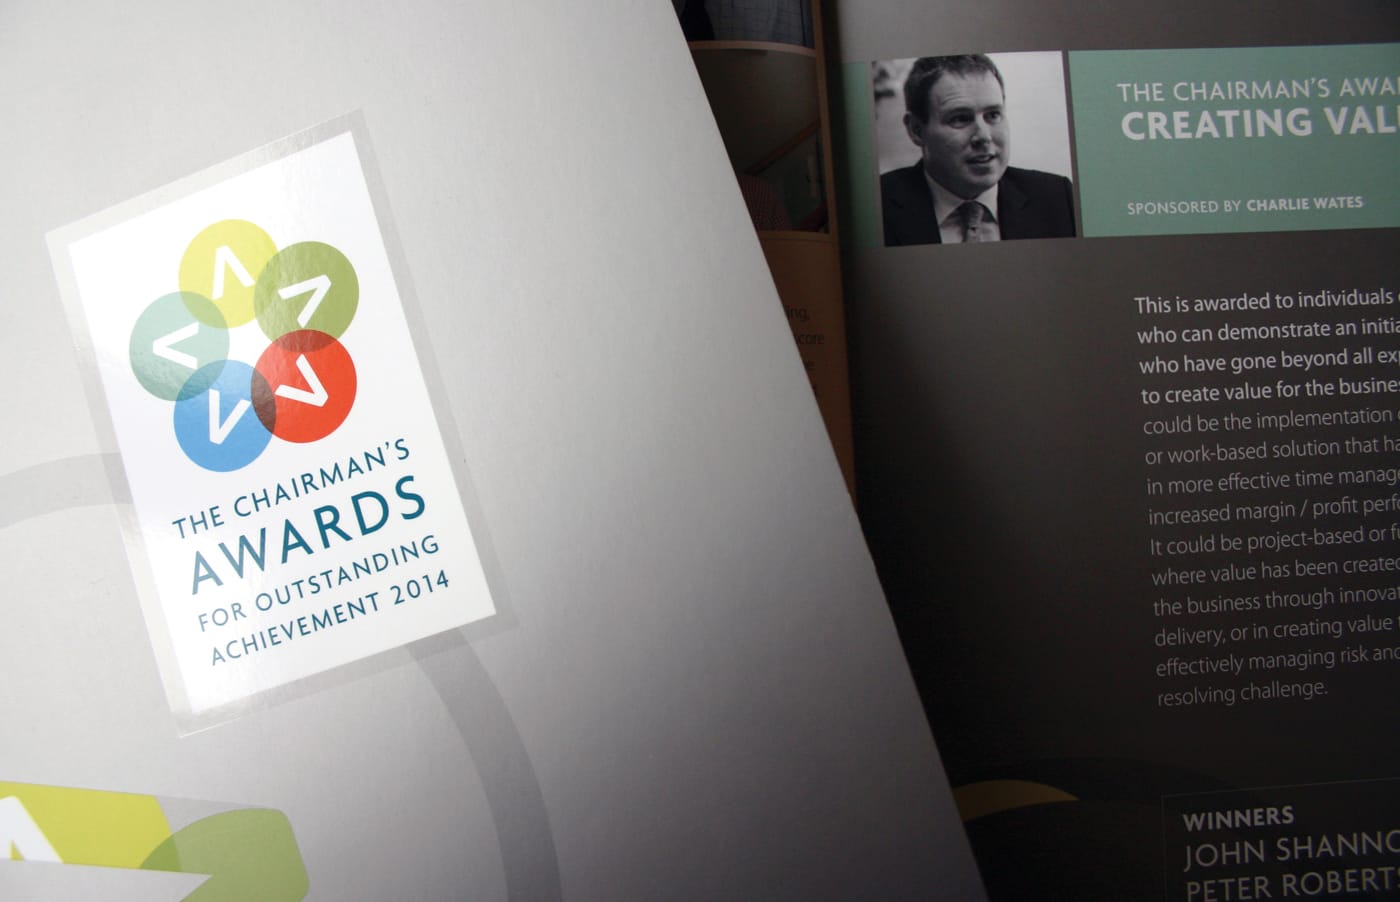 Branding exercise and creation of event brochures, invites, and graphics for an annual awards event on behalf of one of the UK's largest construction companies.